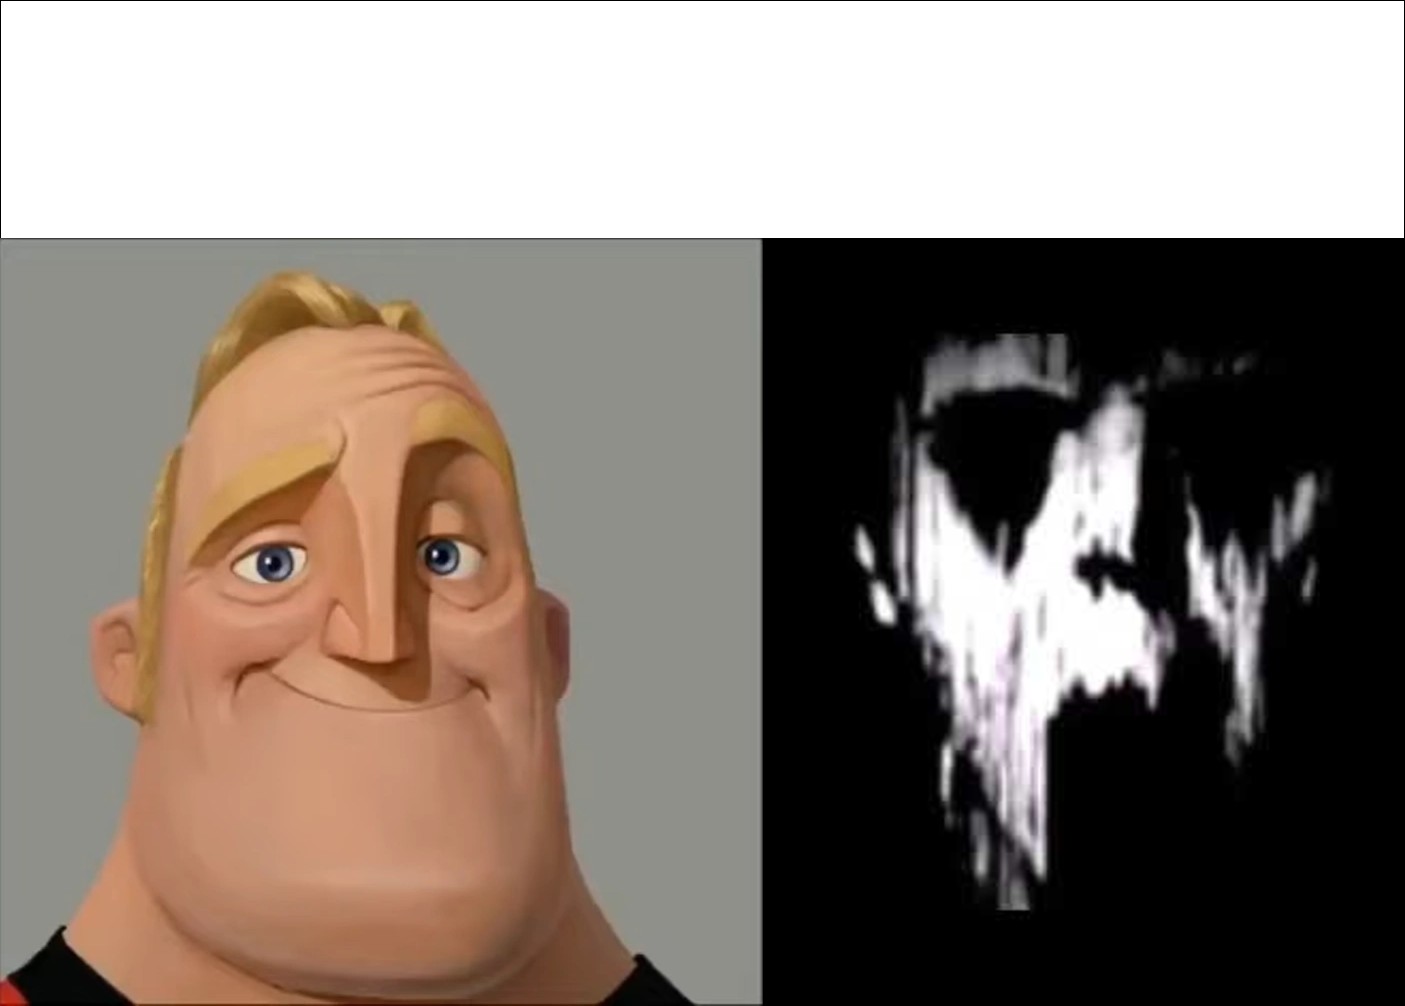 mr incredible becoming uncanny Blank Template - Imgflip